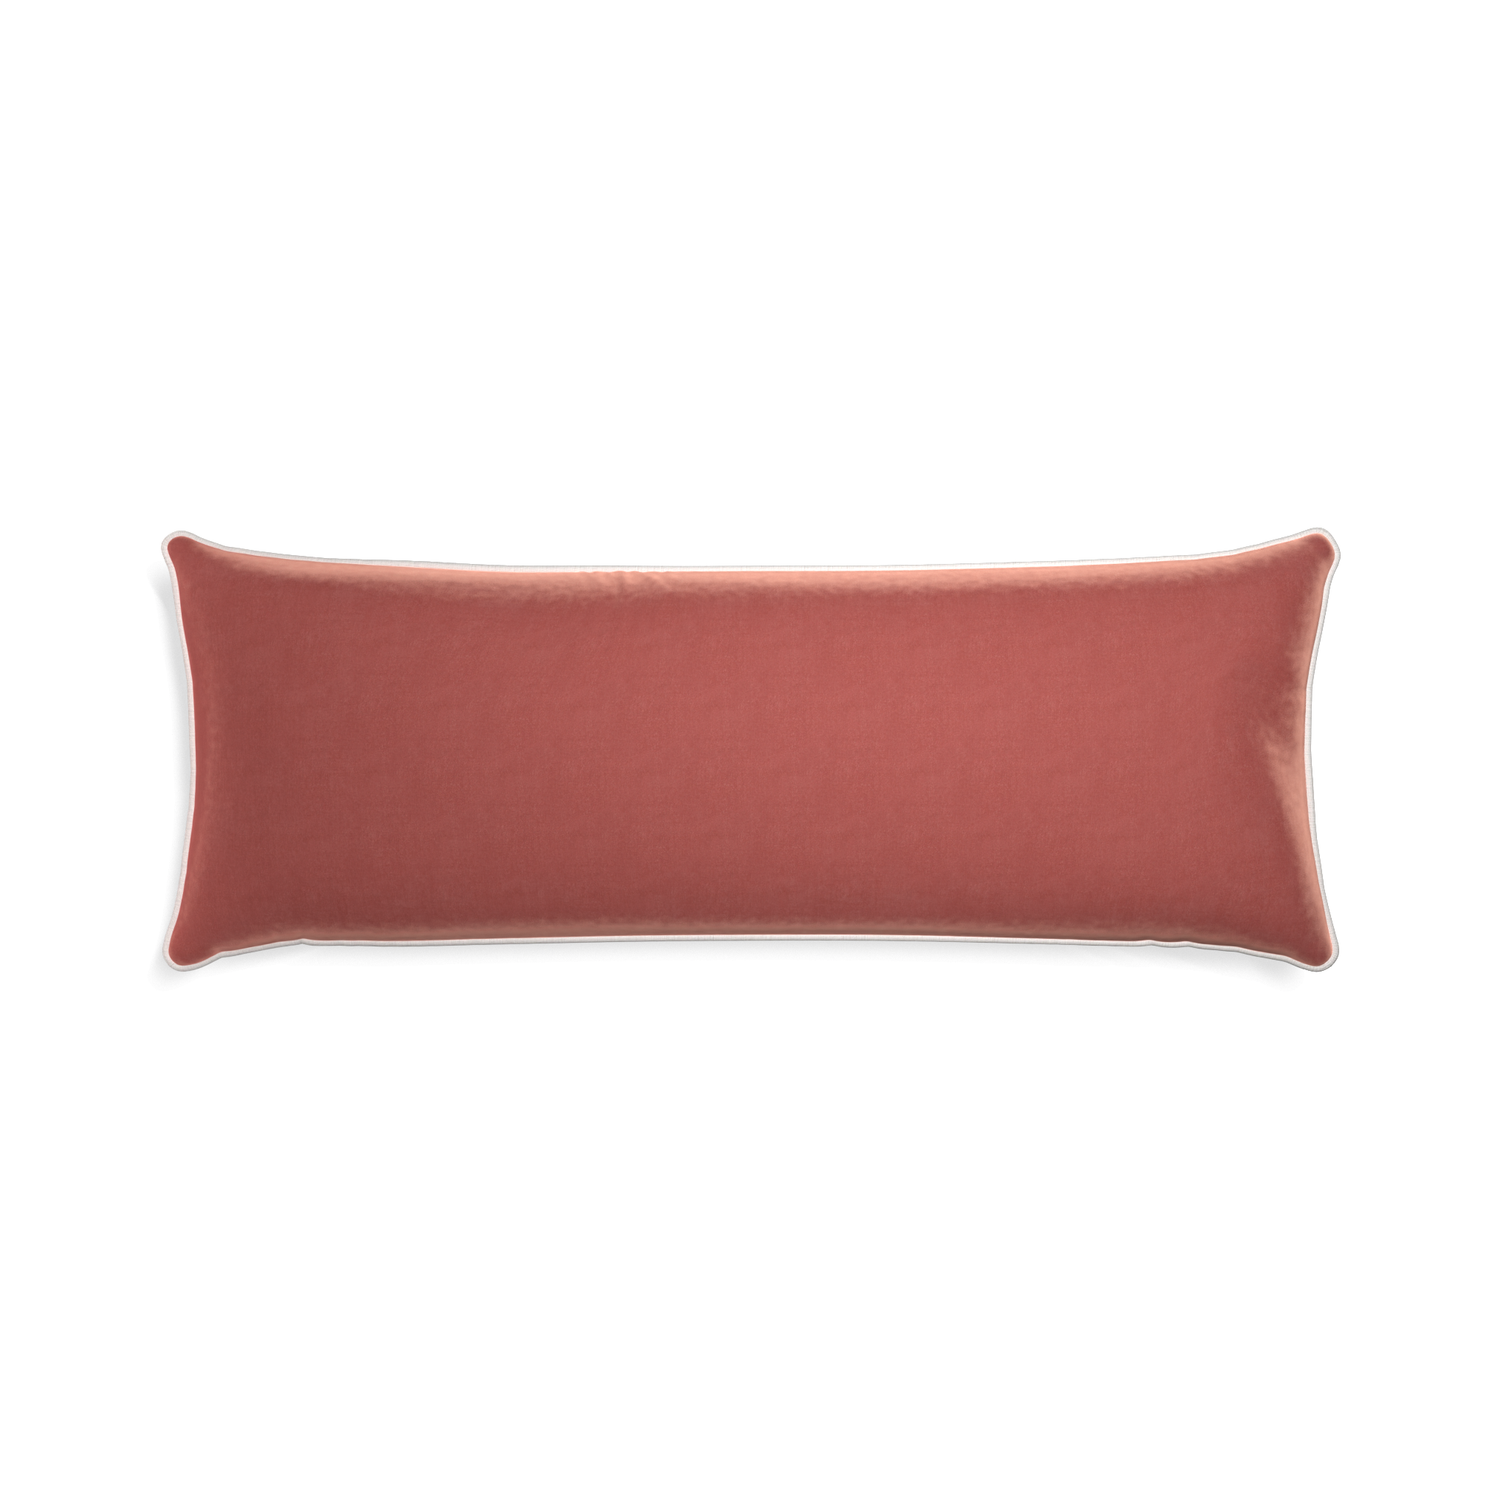 Xl-lumbar cosmo velvet custom pillow with snow piping on white background